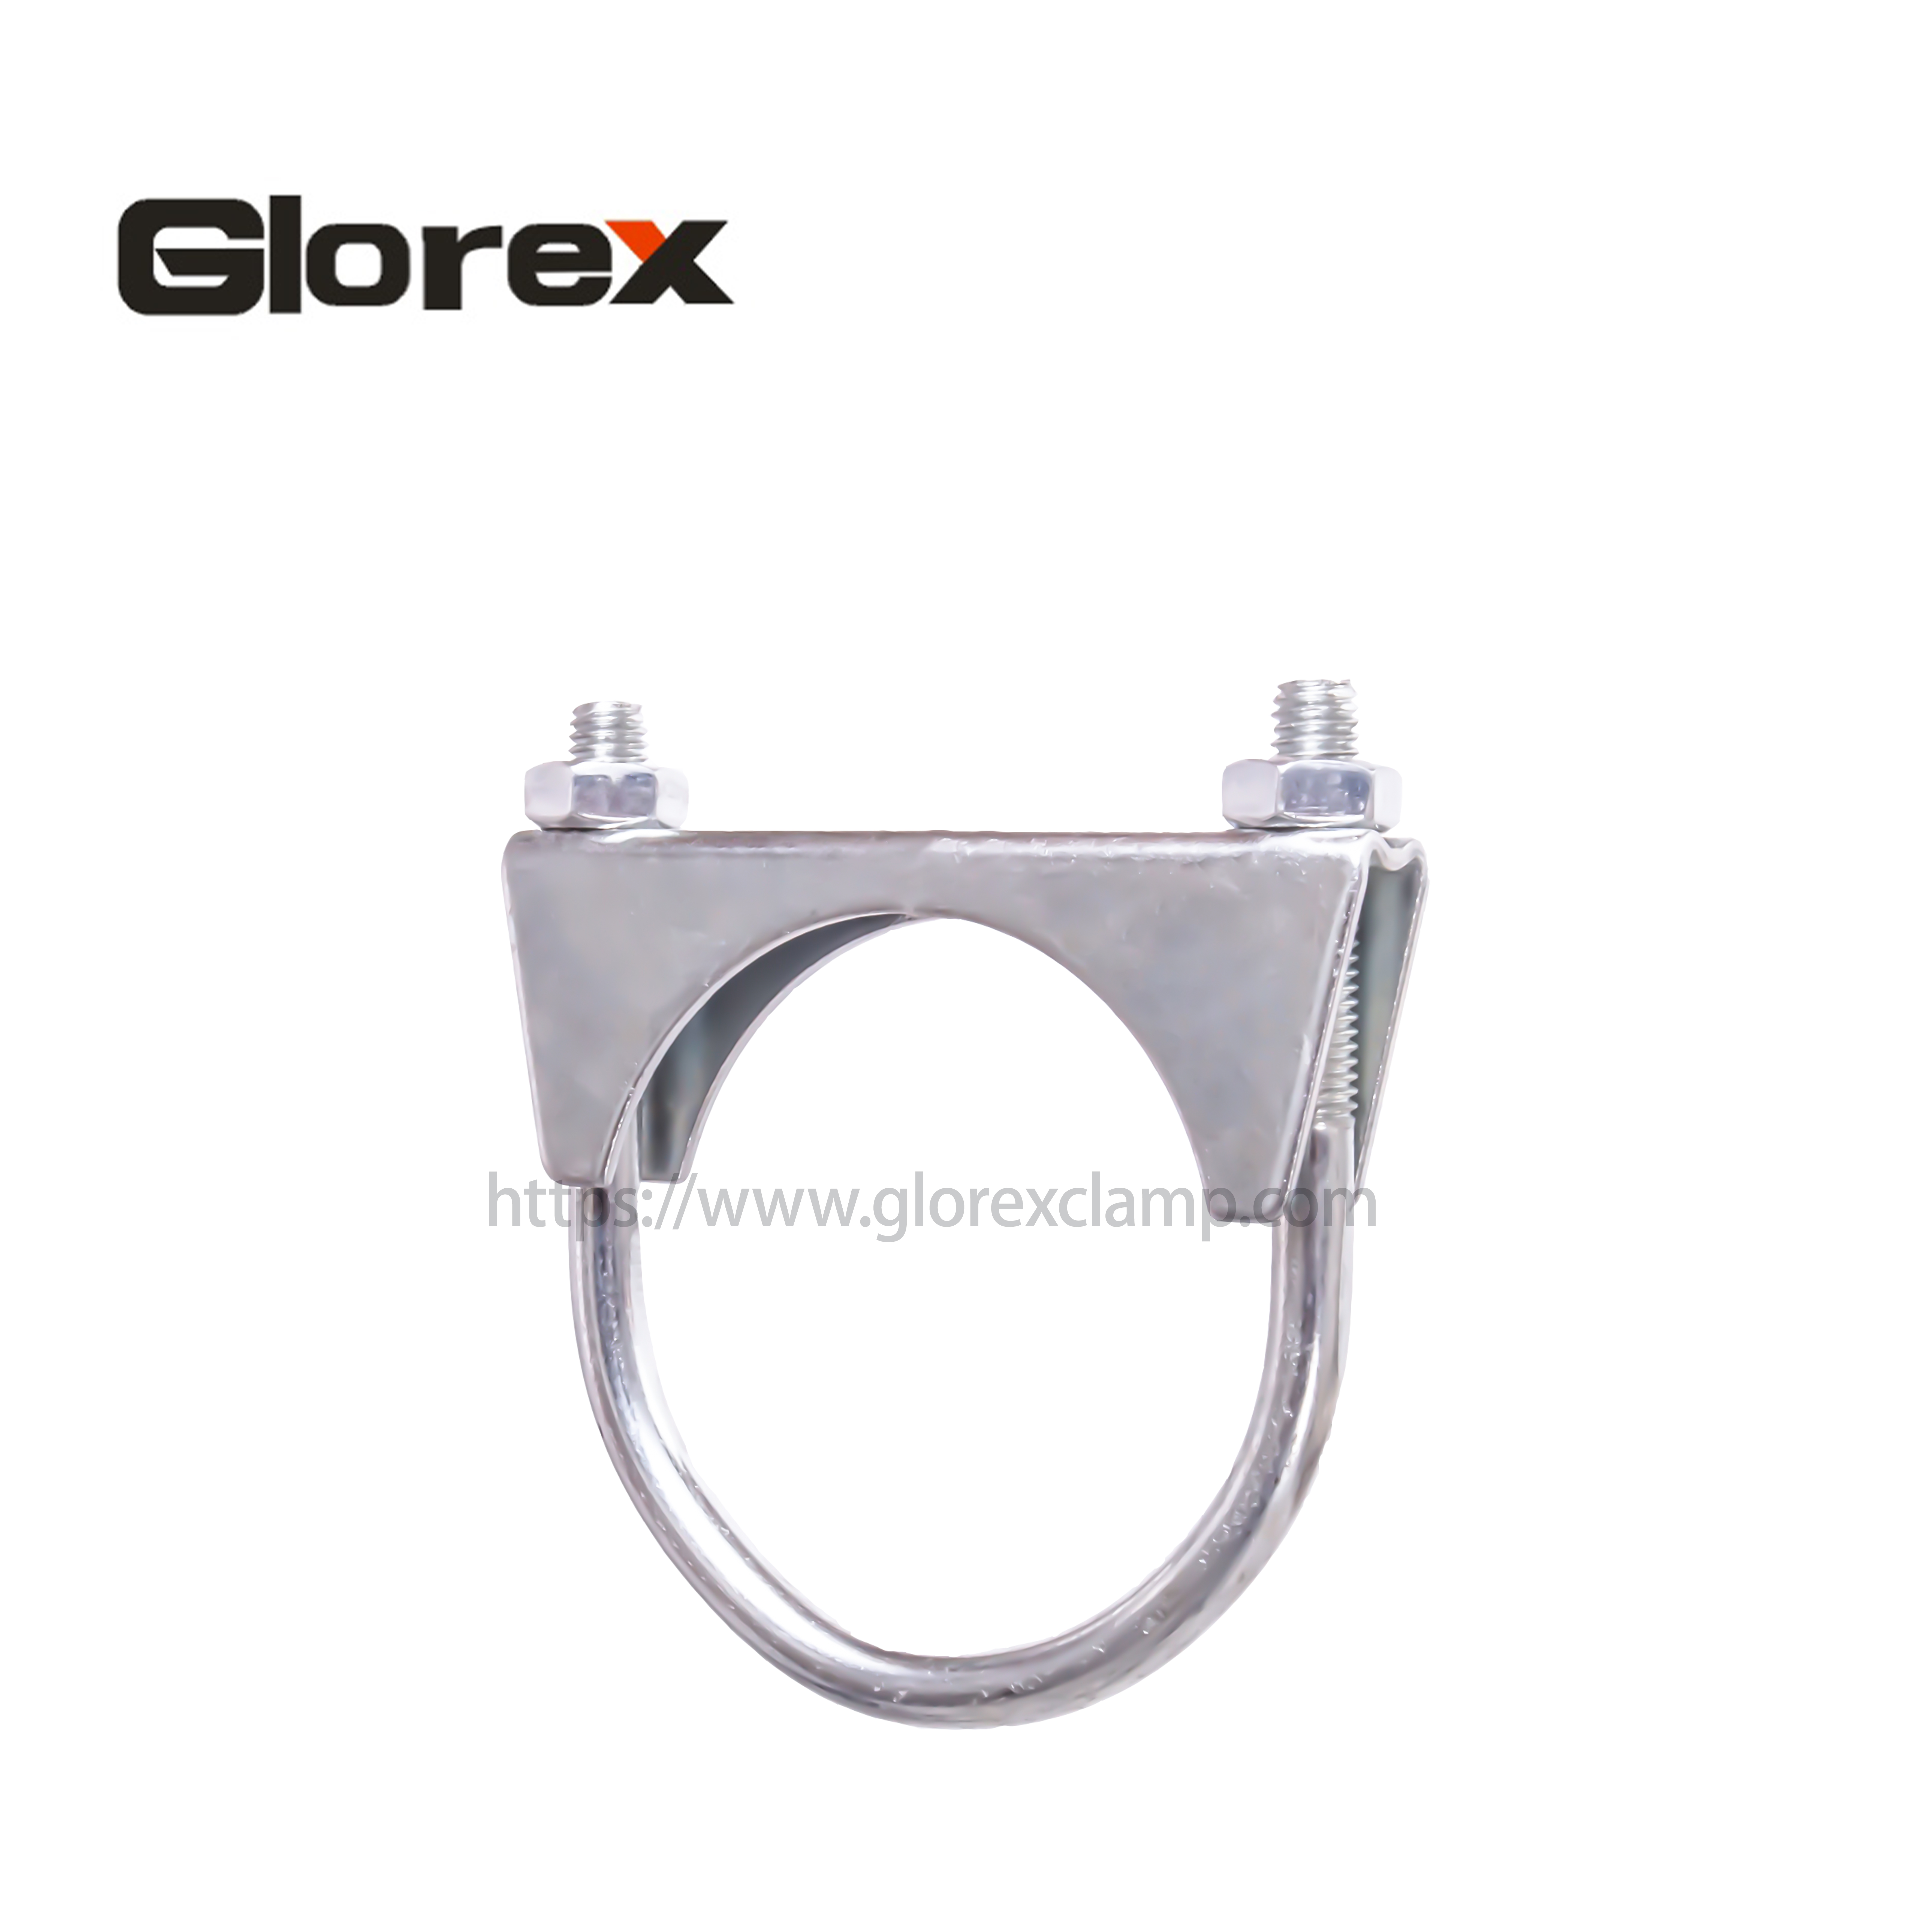 Fixed Competitive Price Clevis Hangers - U-clamp – Glorex